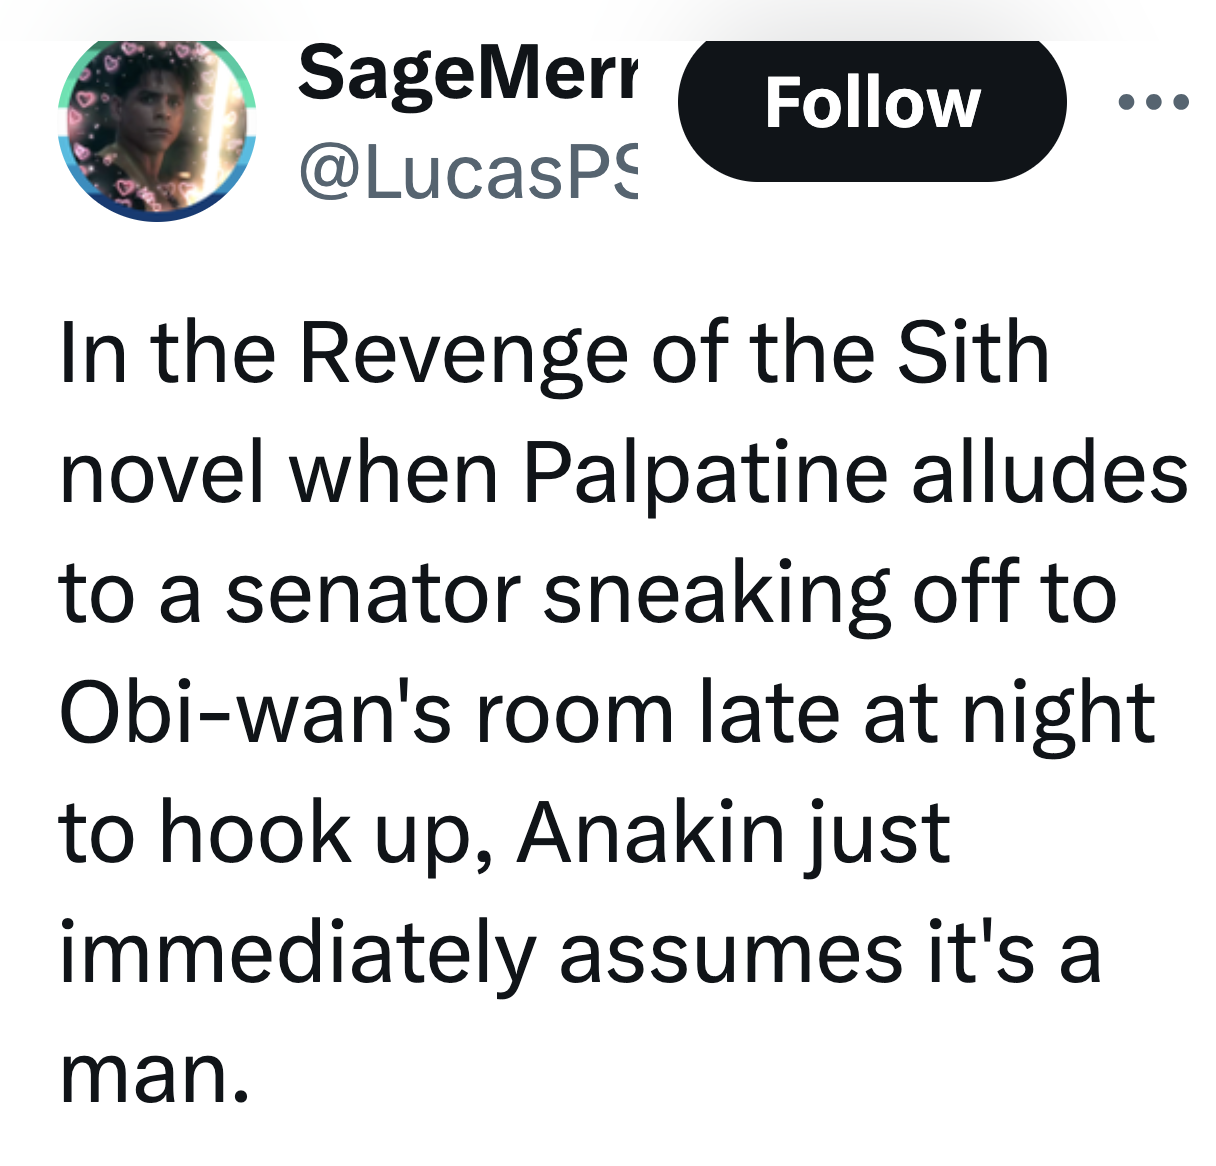 screenshot - SageMerr In the Revenge of the Sith novel when Palpatine alludes to a senator sneaking off to Obiwan's room late at night to hook up, Anakin just immediately assumes it's a man.